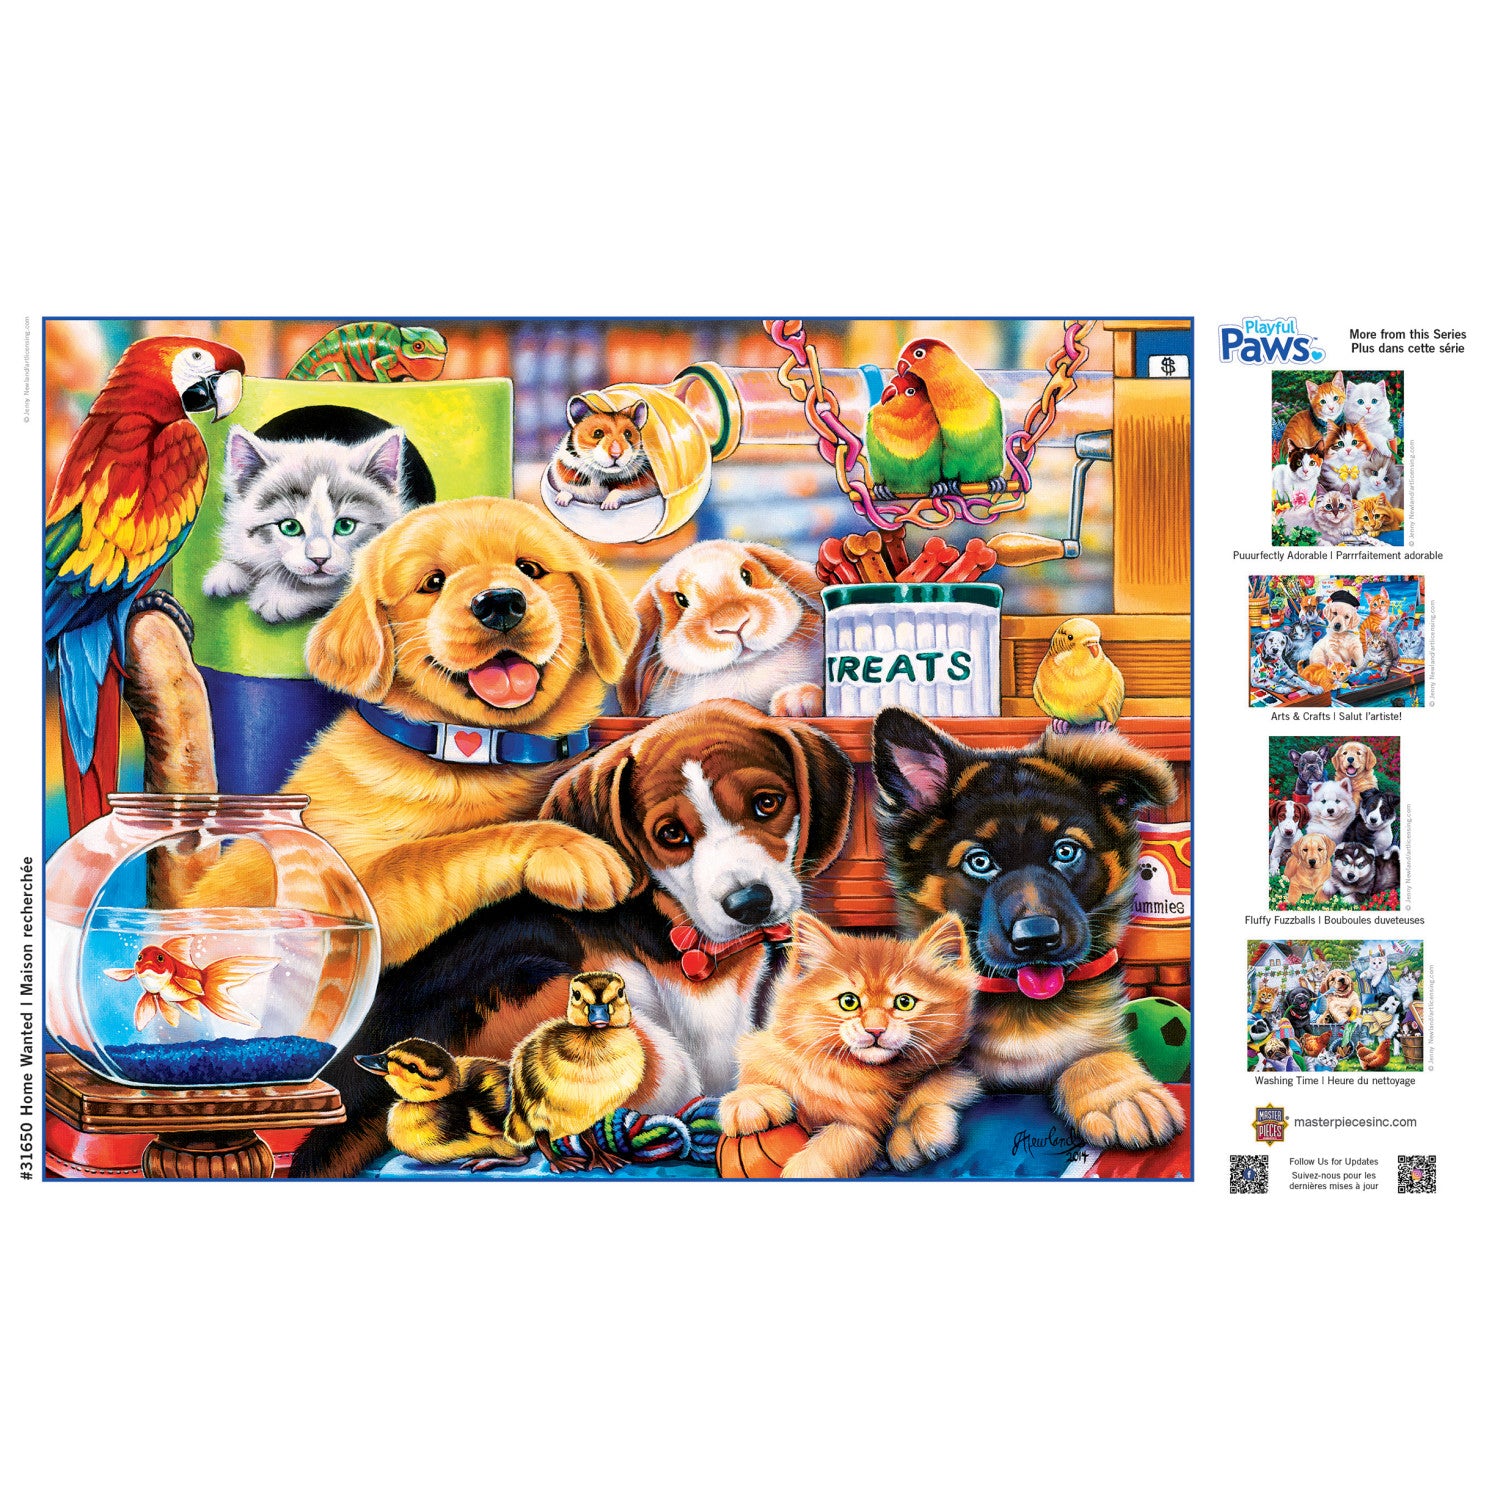 Playful Paws - Home Wanted 300 Piece EZ Grip Jigsaw Puzzle